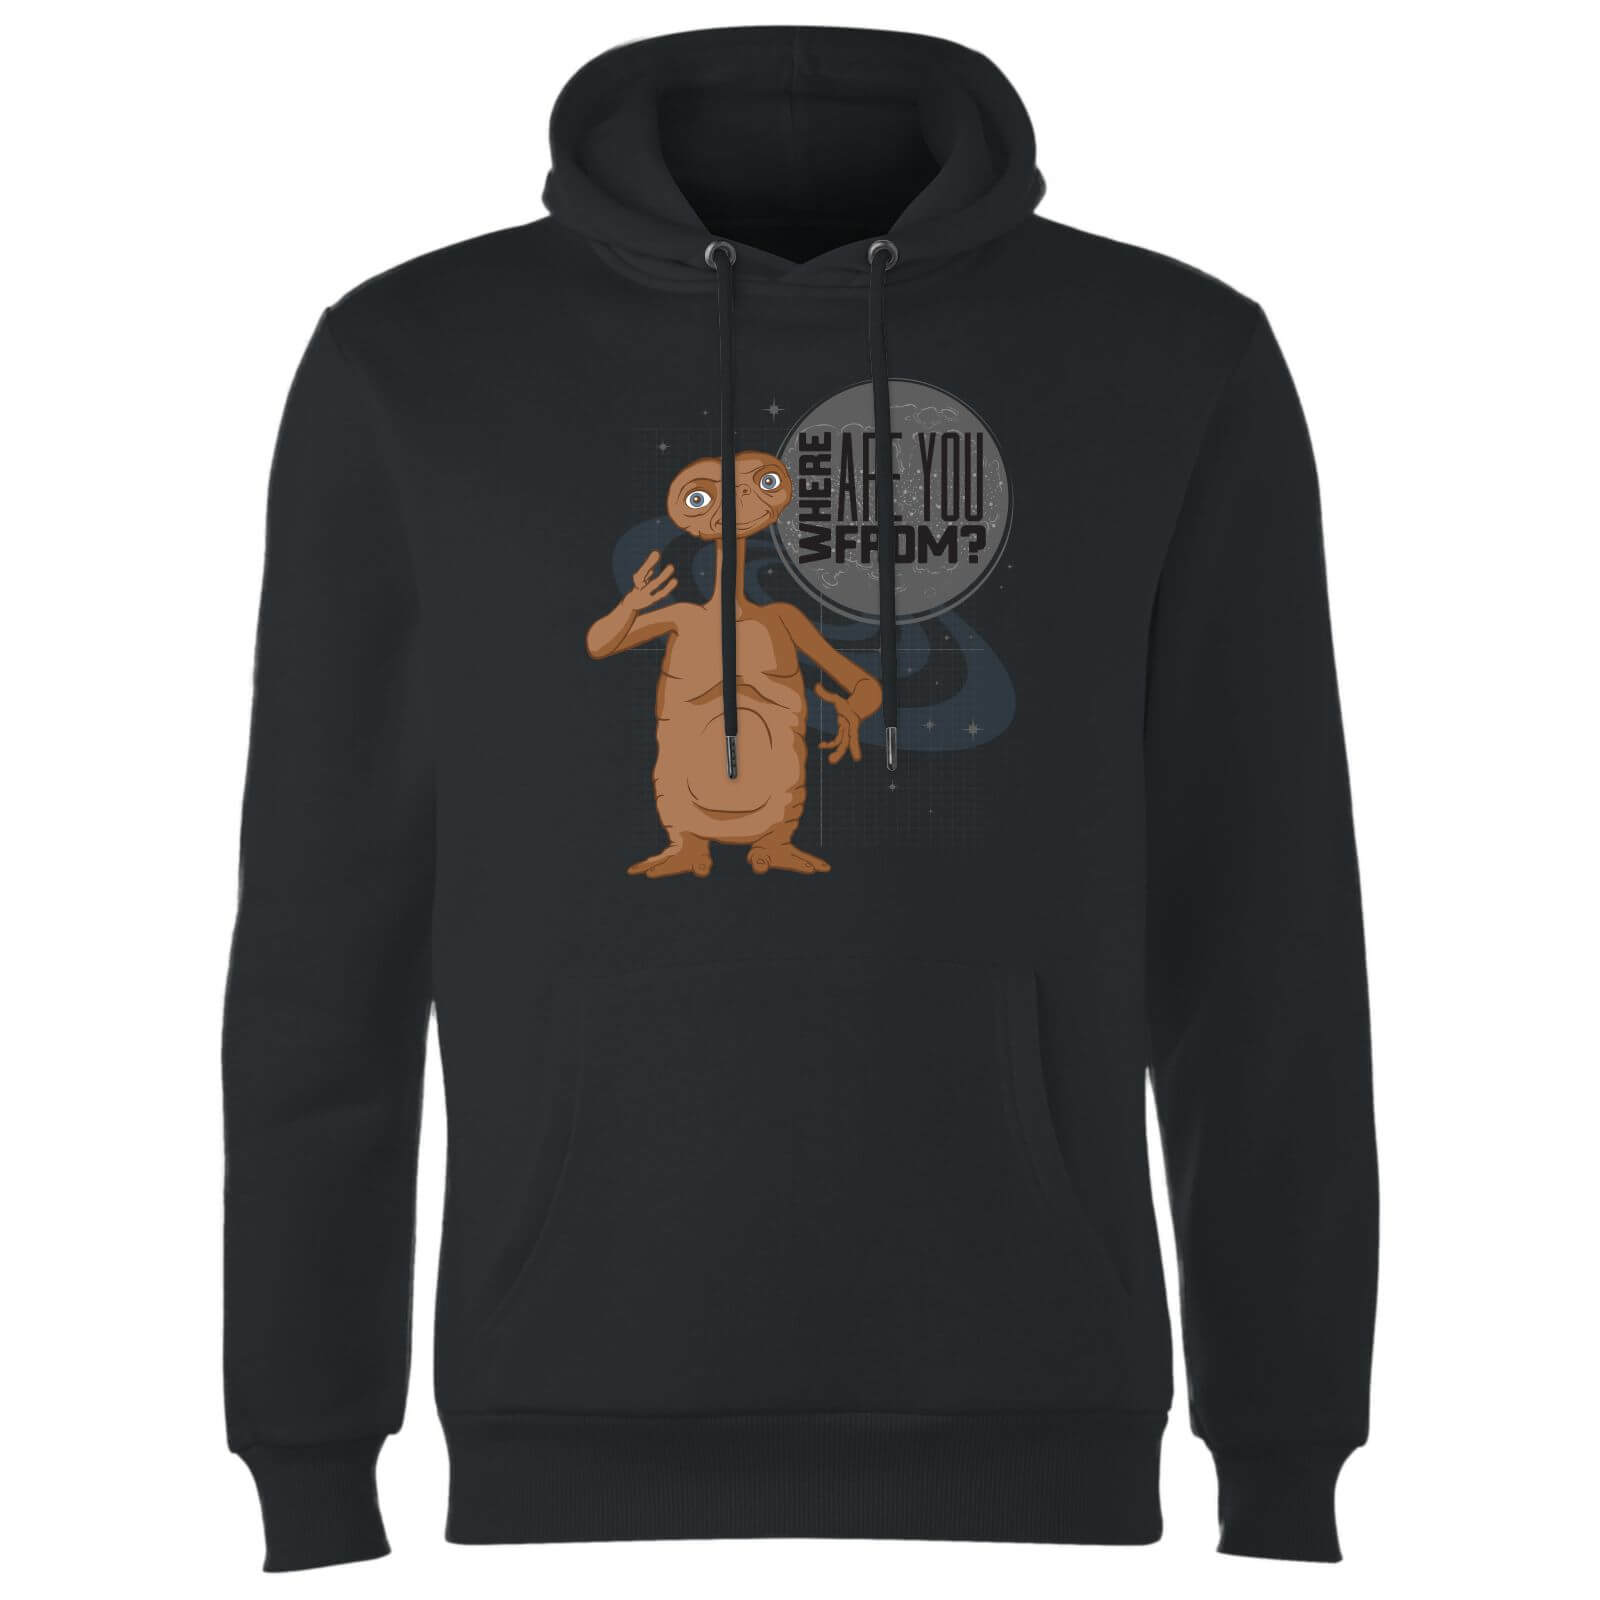 ET Where Are You From Hoodie - Black - L - Black